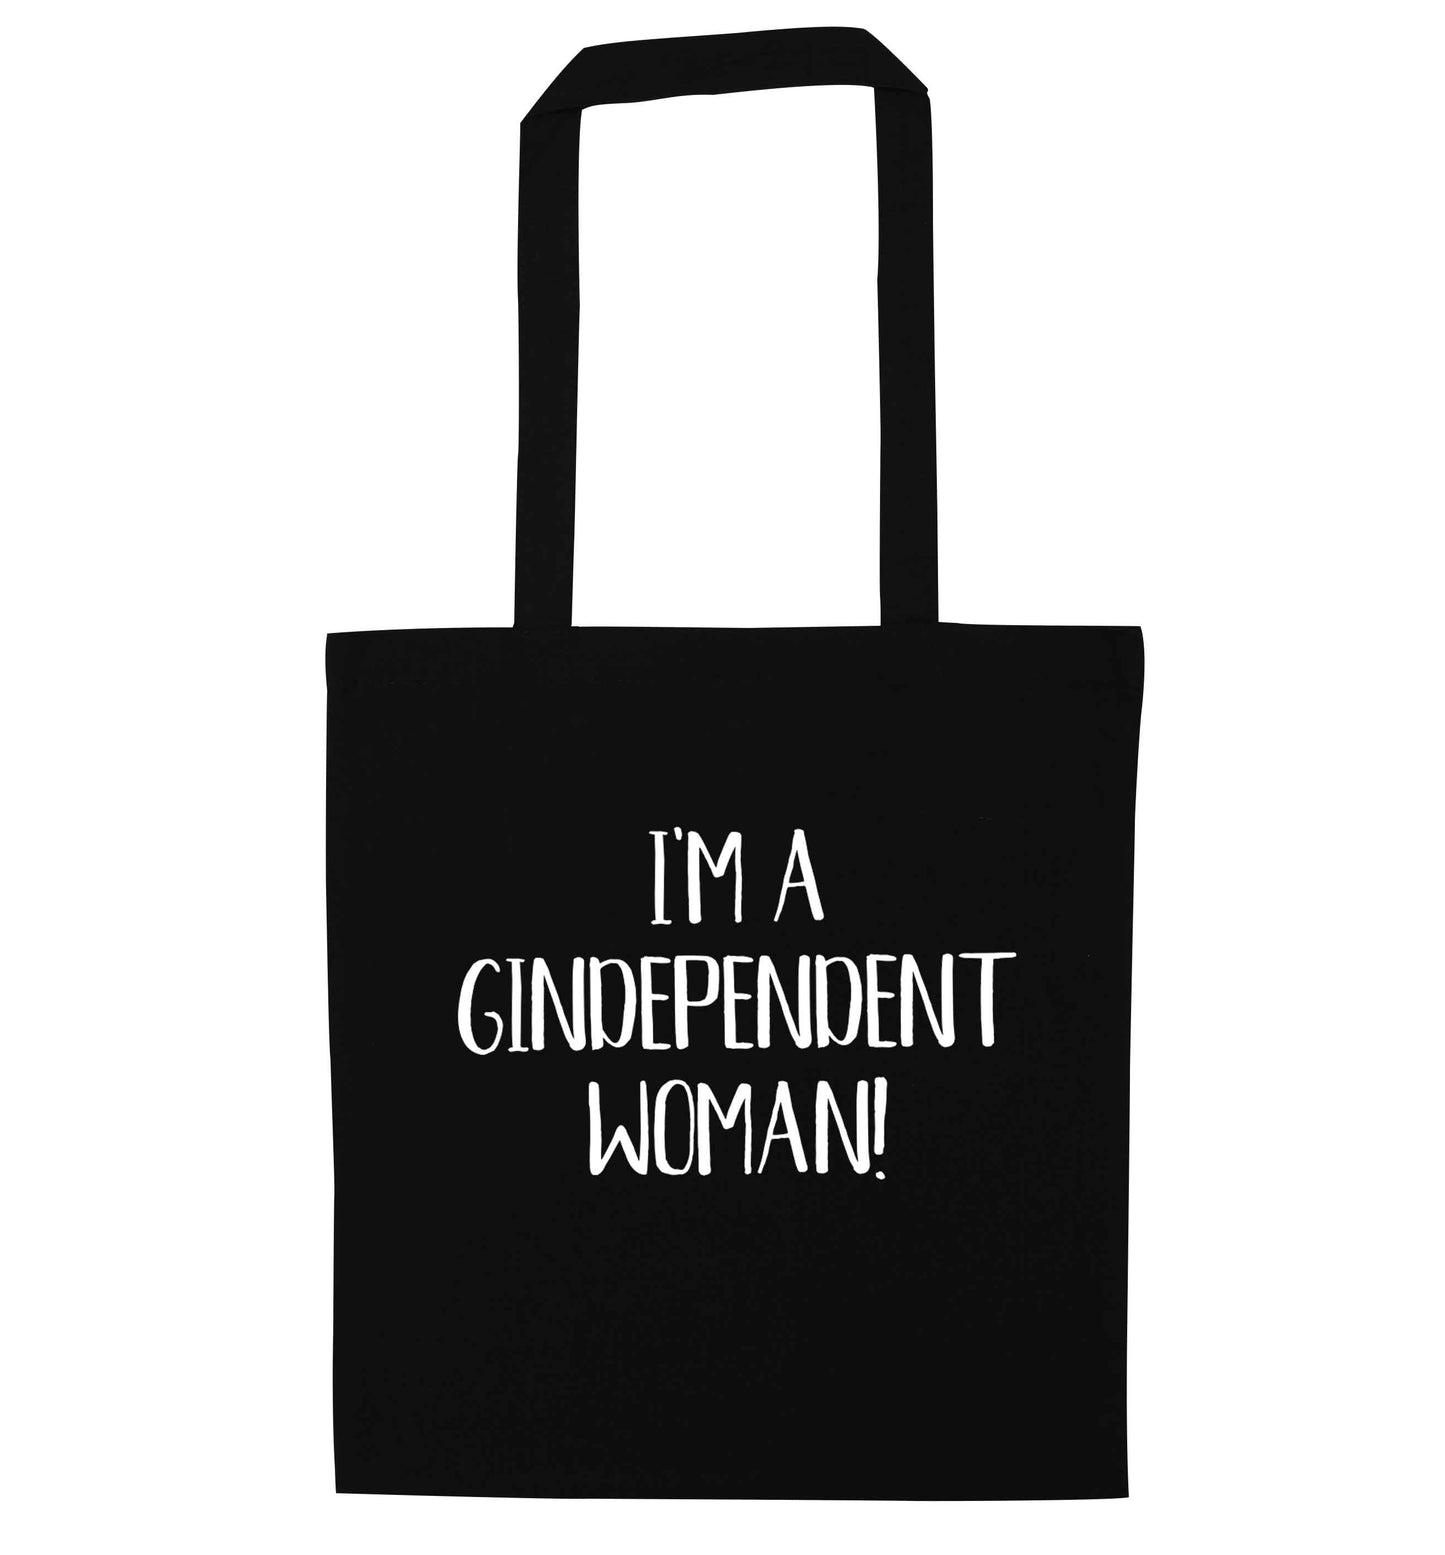 I'm a gindependent woman black tote bag